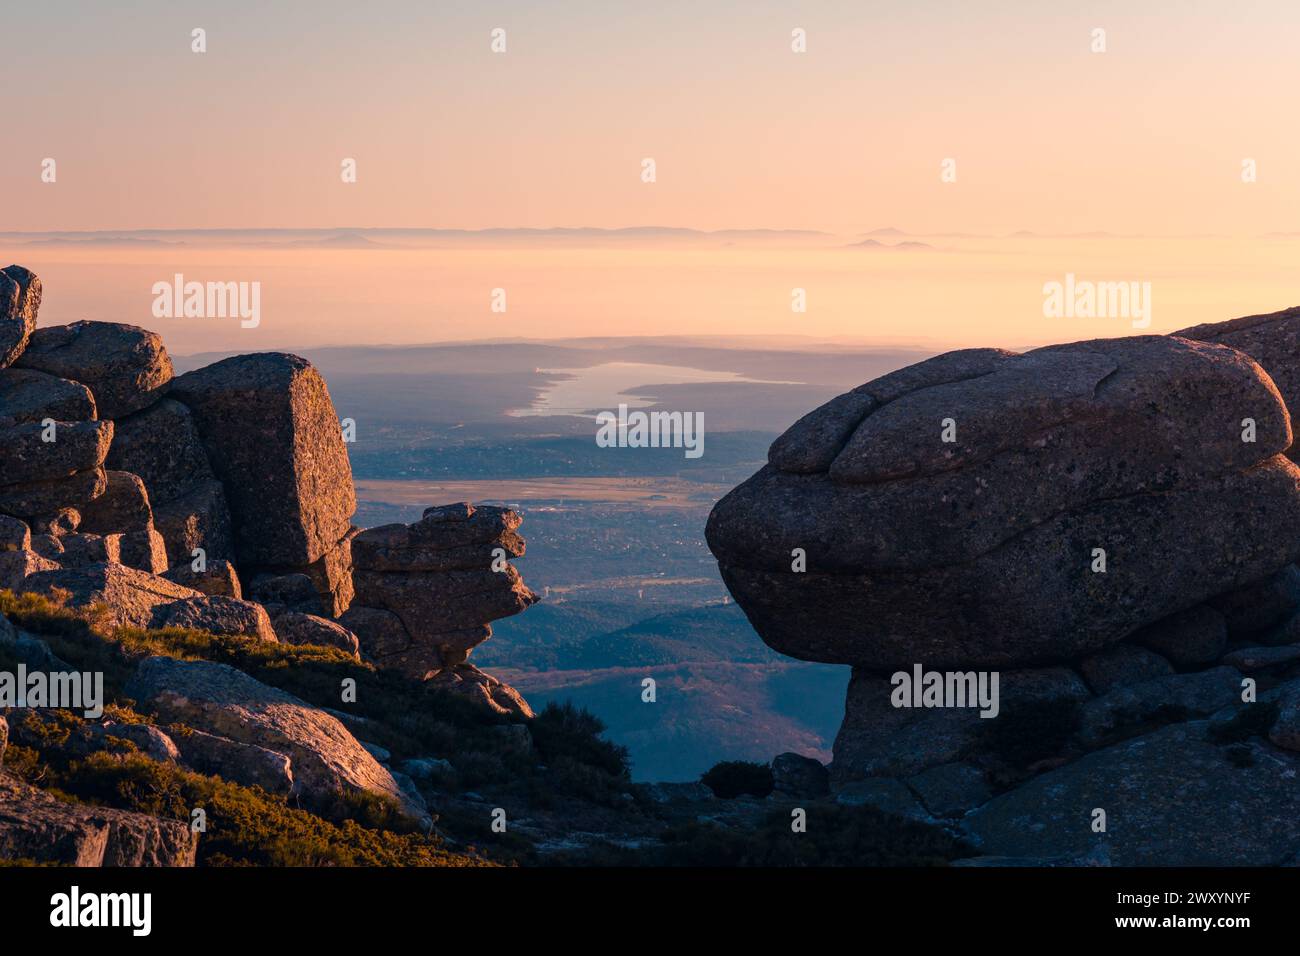 Sunset view from Siete Picos with silhouettes of rocks and distant mountains in the backdrop Stock Photo